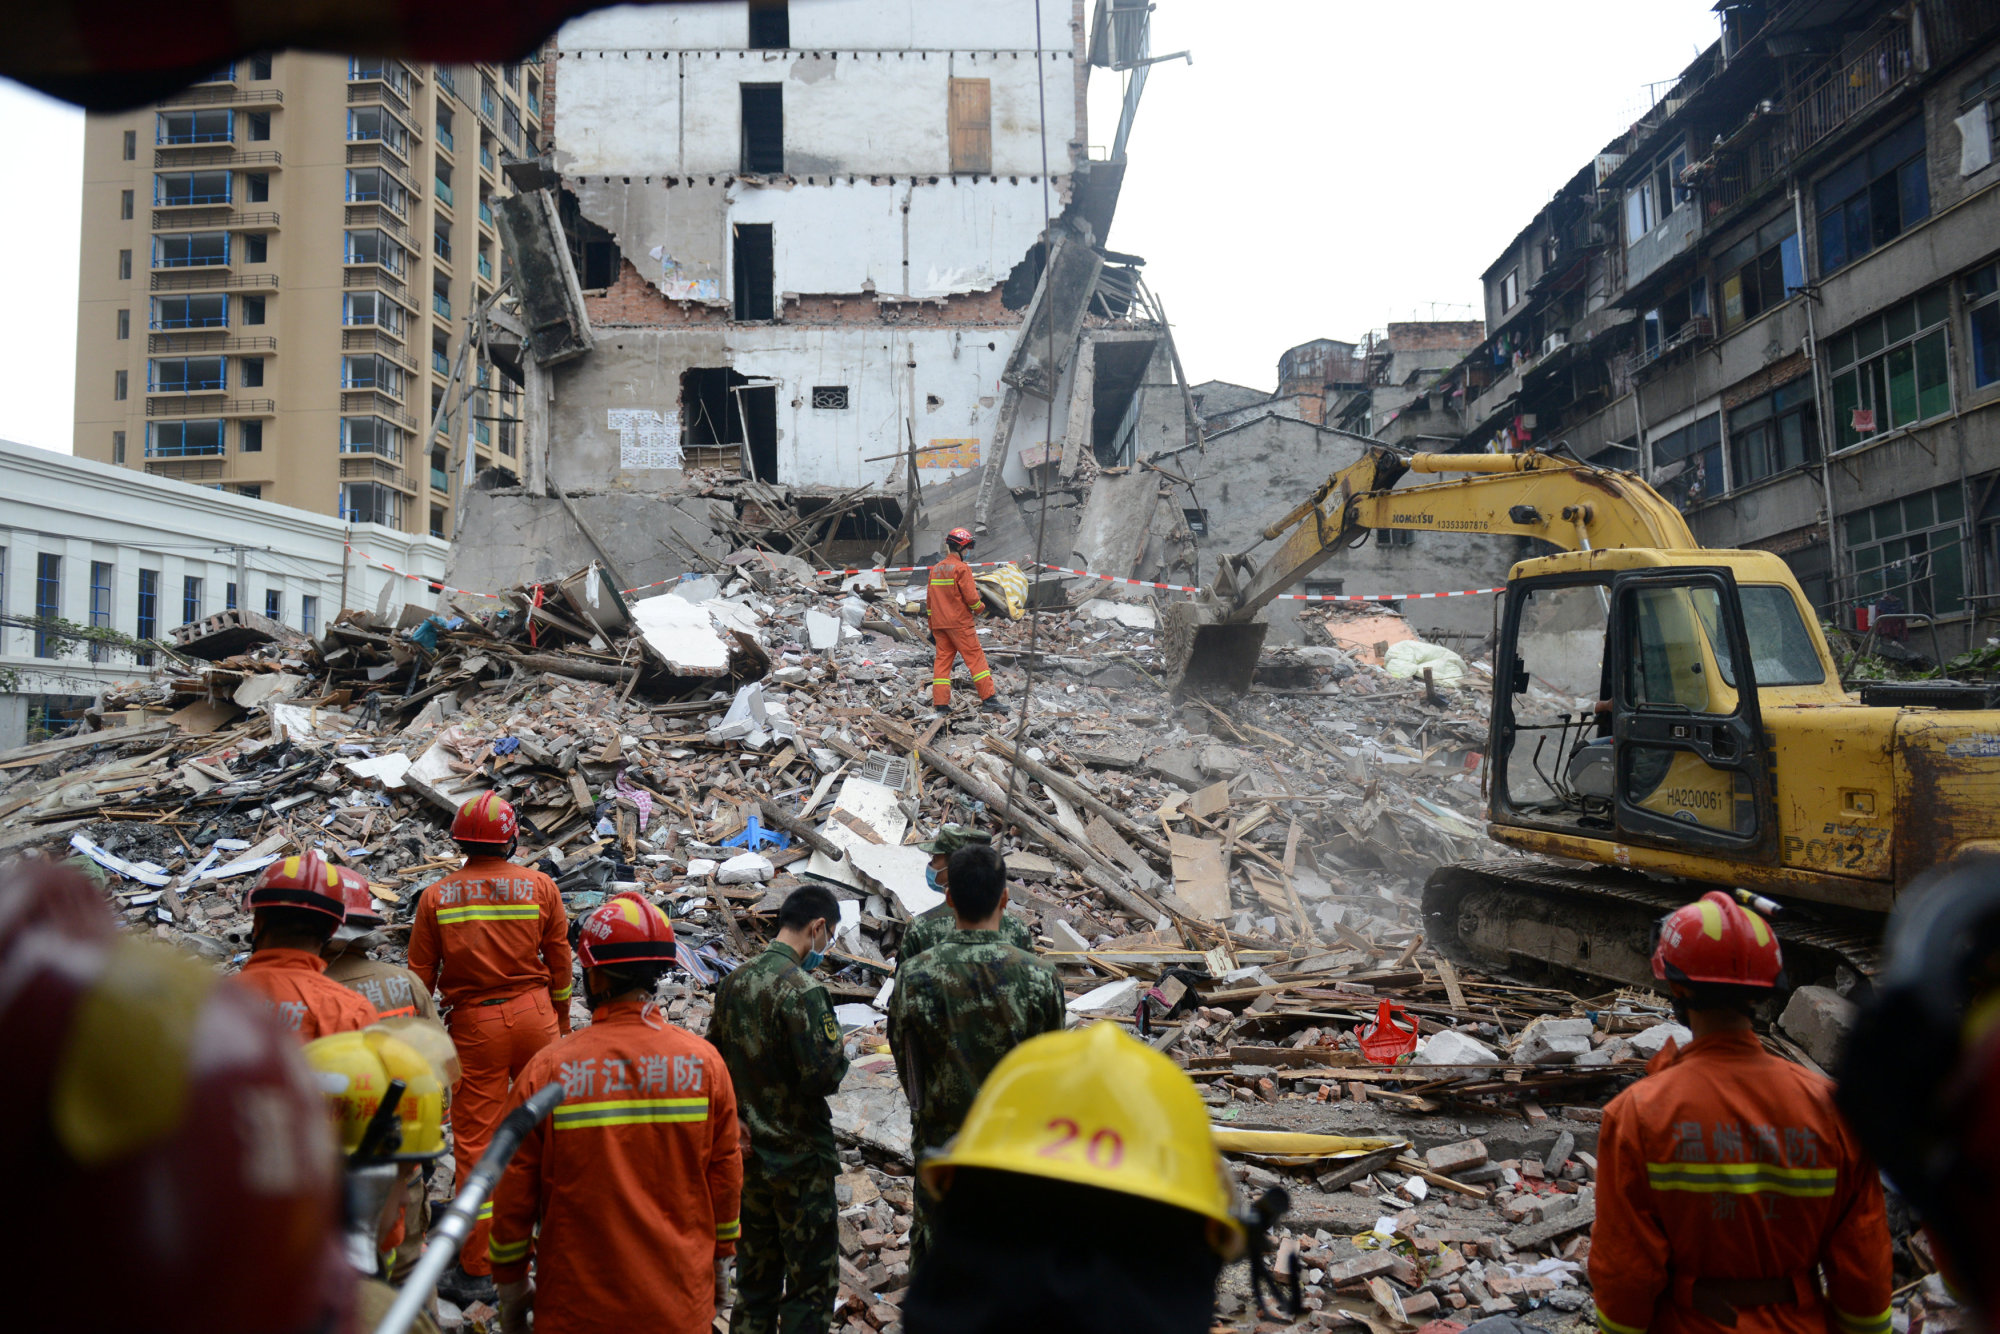 At least 20 reported killed as migrantpacked buildings in China